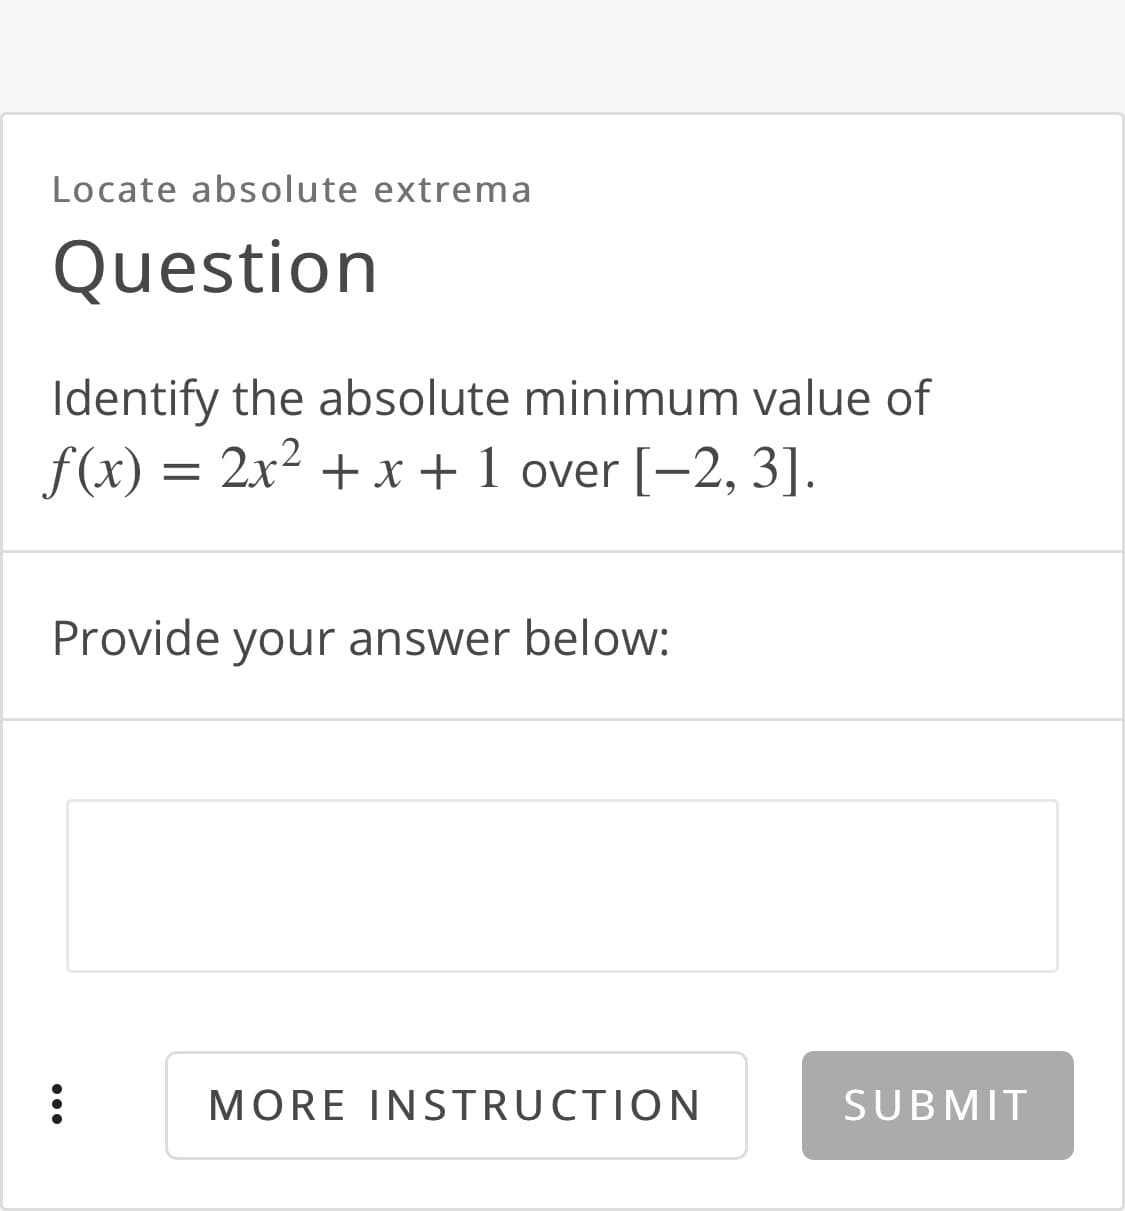 Locate absolute extrema
Question
Identify the absolute minimum value of
f(x) =
2x2 + x + 1 over [-2, 3].
Provide your answer below:
MORE INSTRUCTION
SUBMIT
